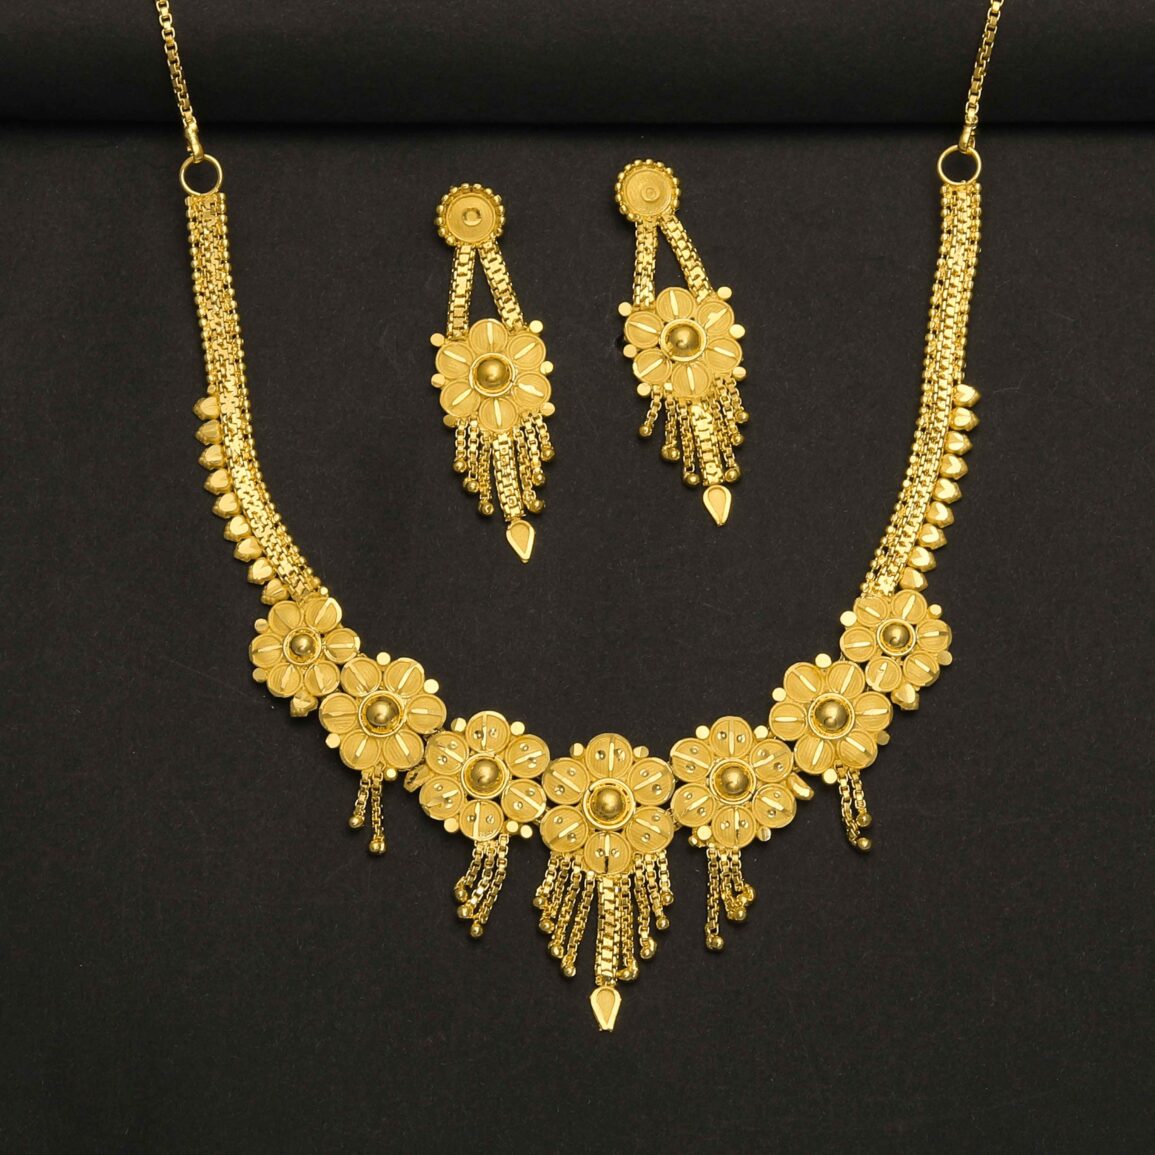 Gold plated flower type necklace with ear rings